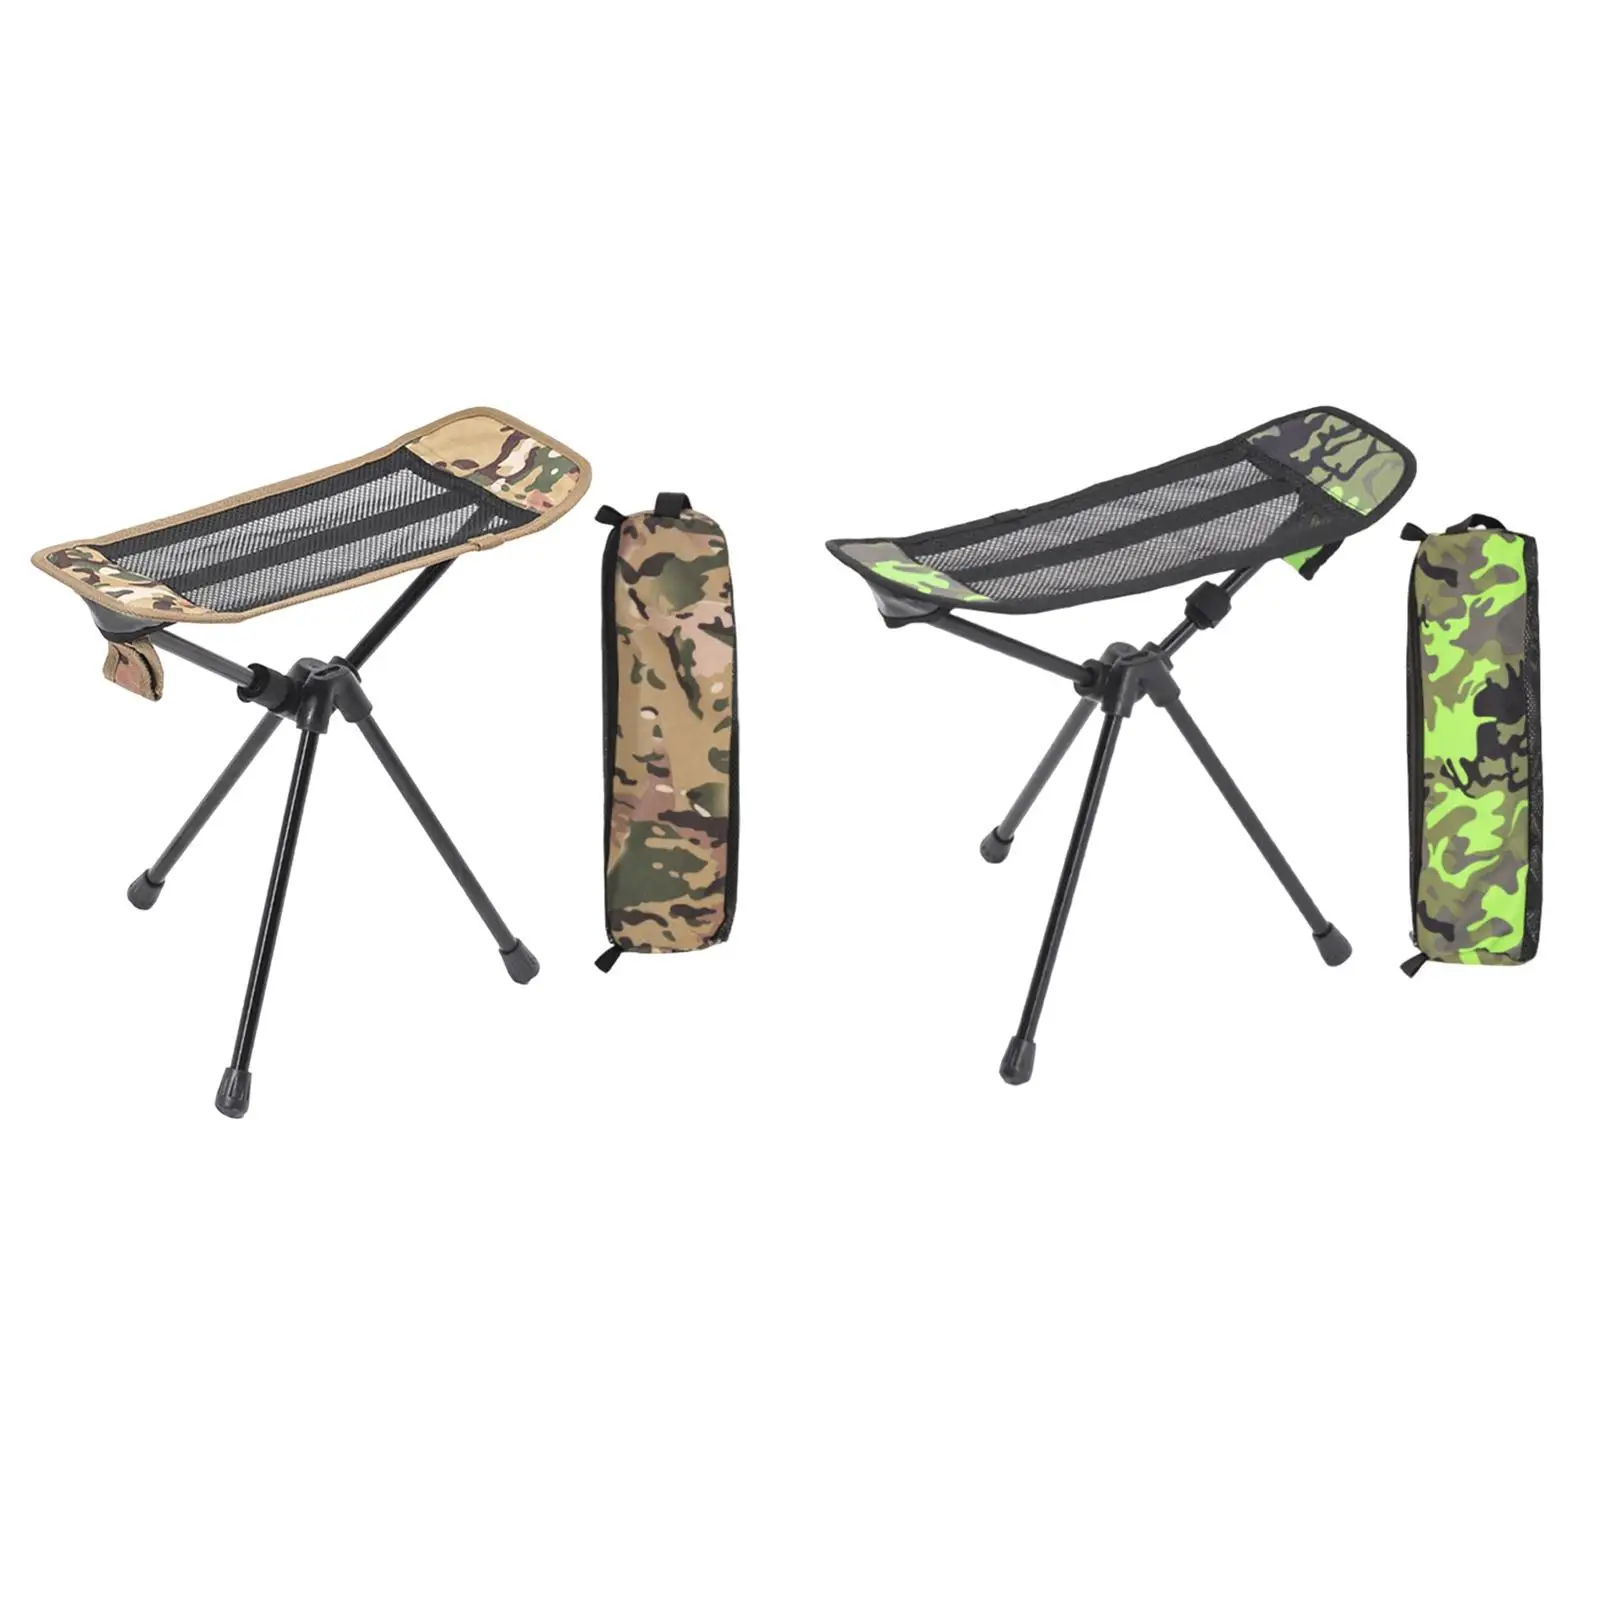 Collapsible Footstool with Carry Bag Folding Chair Seat Stool recliner Foot Rest for Fishing BBQ Travel Camping Picnic